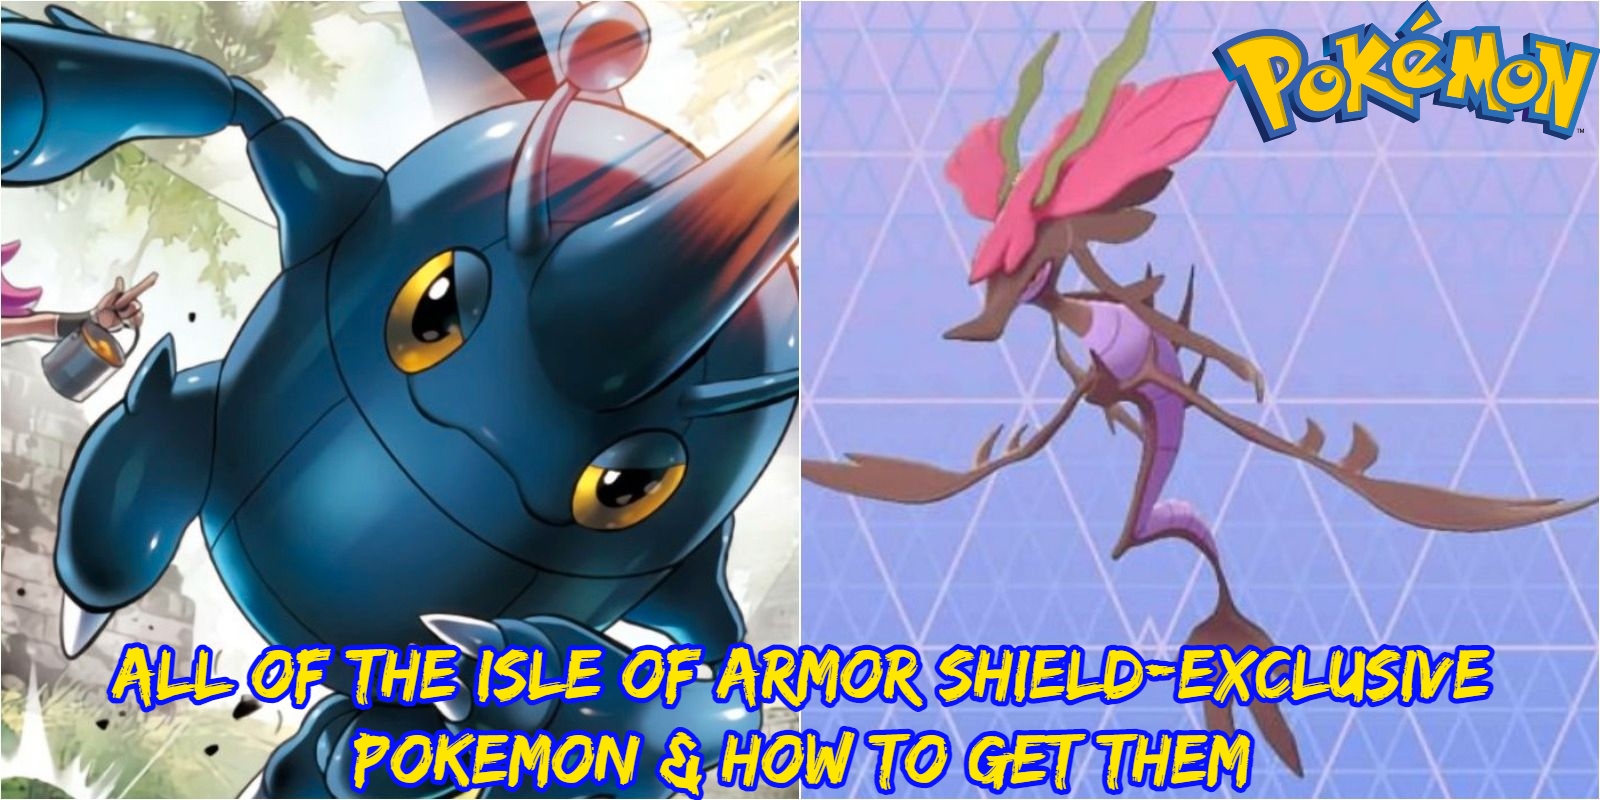 You are currently viewing Pokemon: All Of The Isle Of Armor Shield-Exclusive Pokemon &How To Get Them